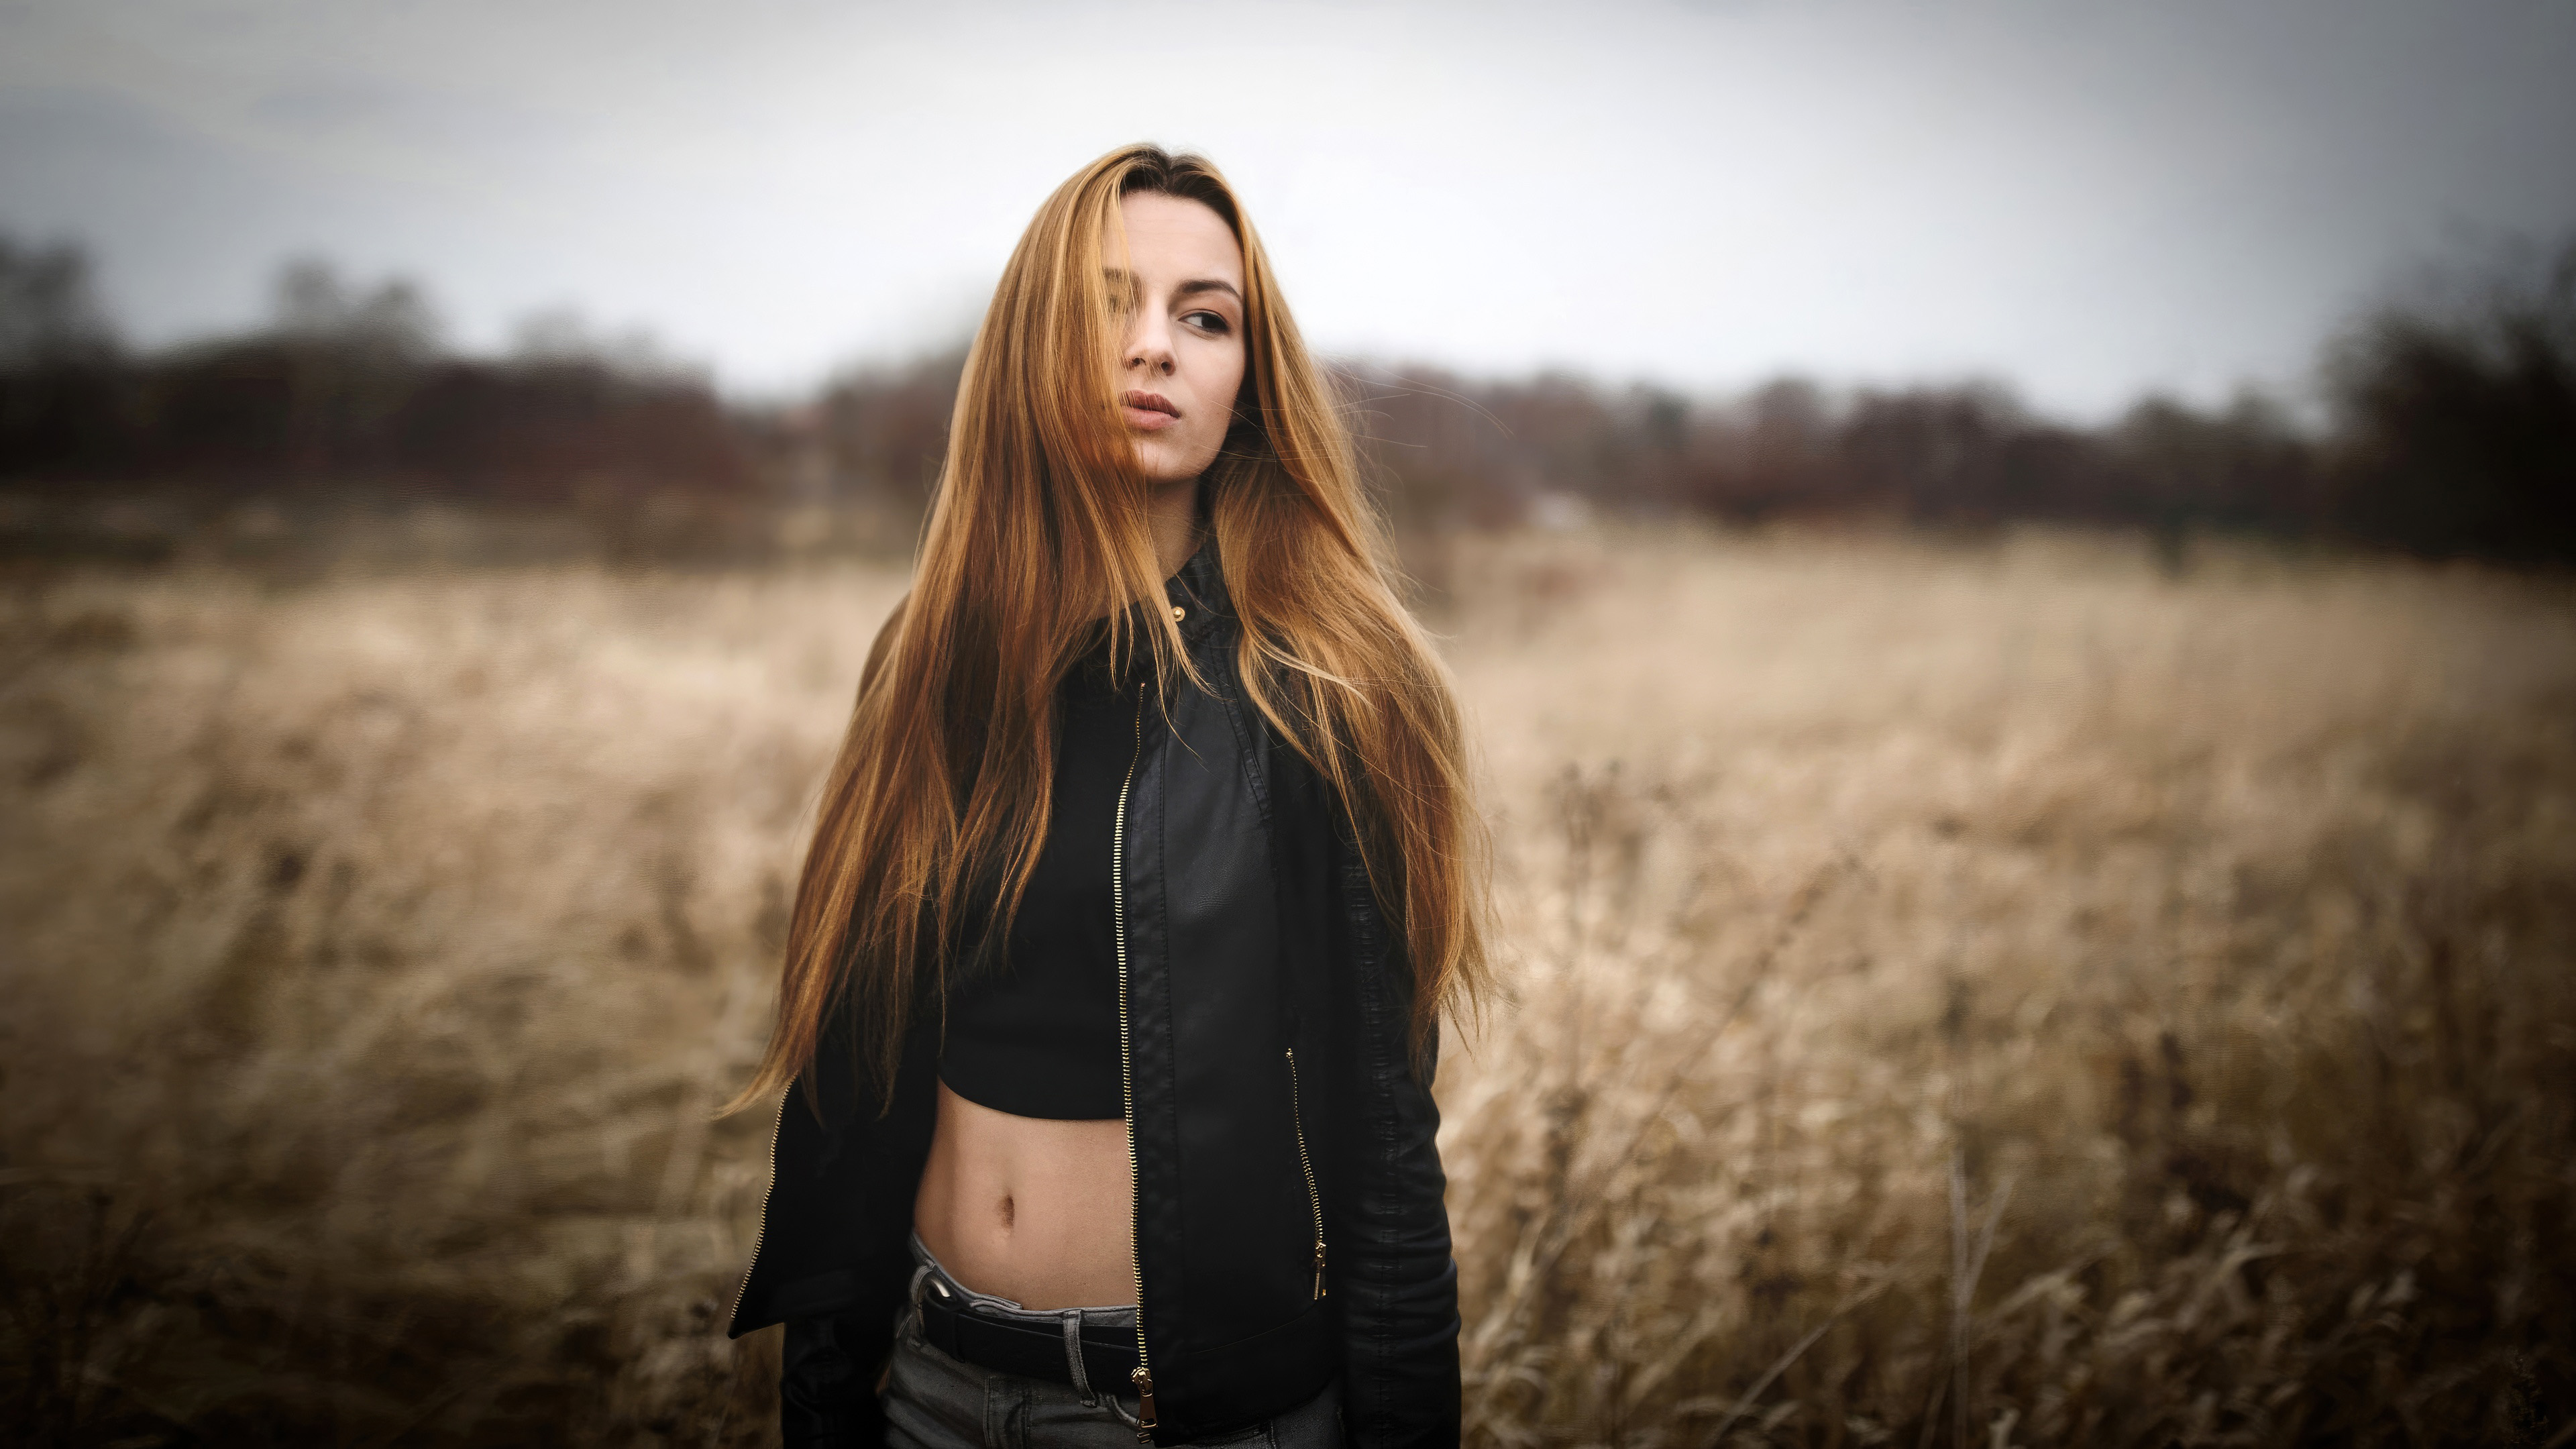 Black Leather Jacket Redhead Long Hairs On Face Wallpaperhd Girls Wallpapers4k Wallpapers 